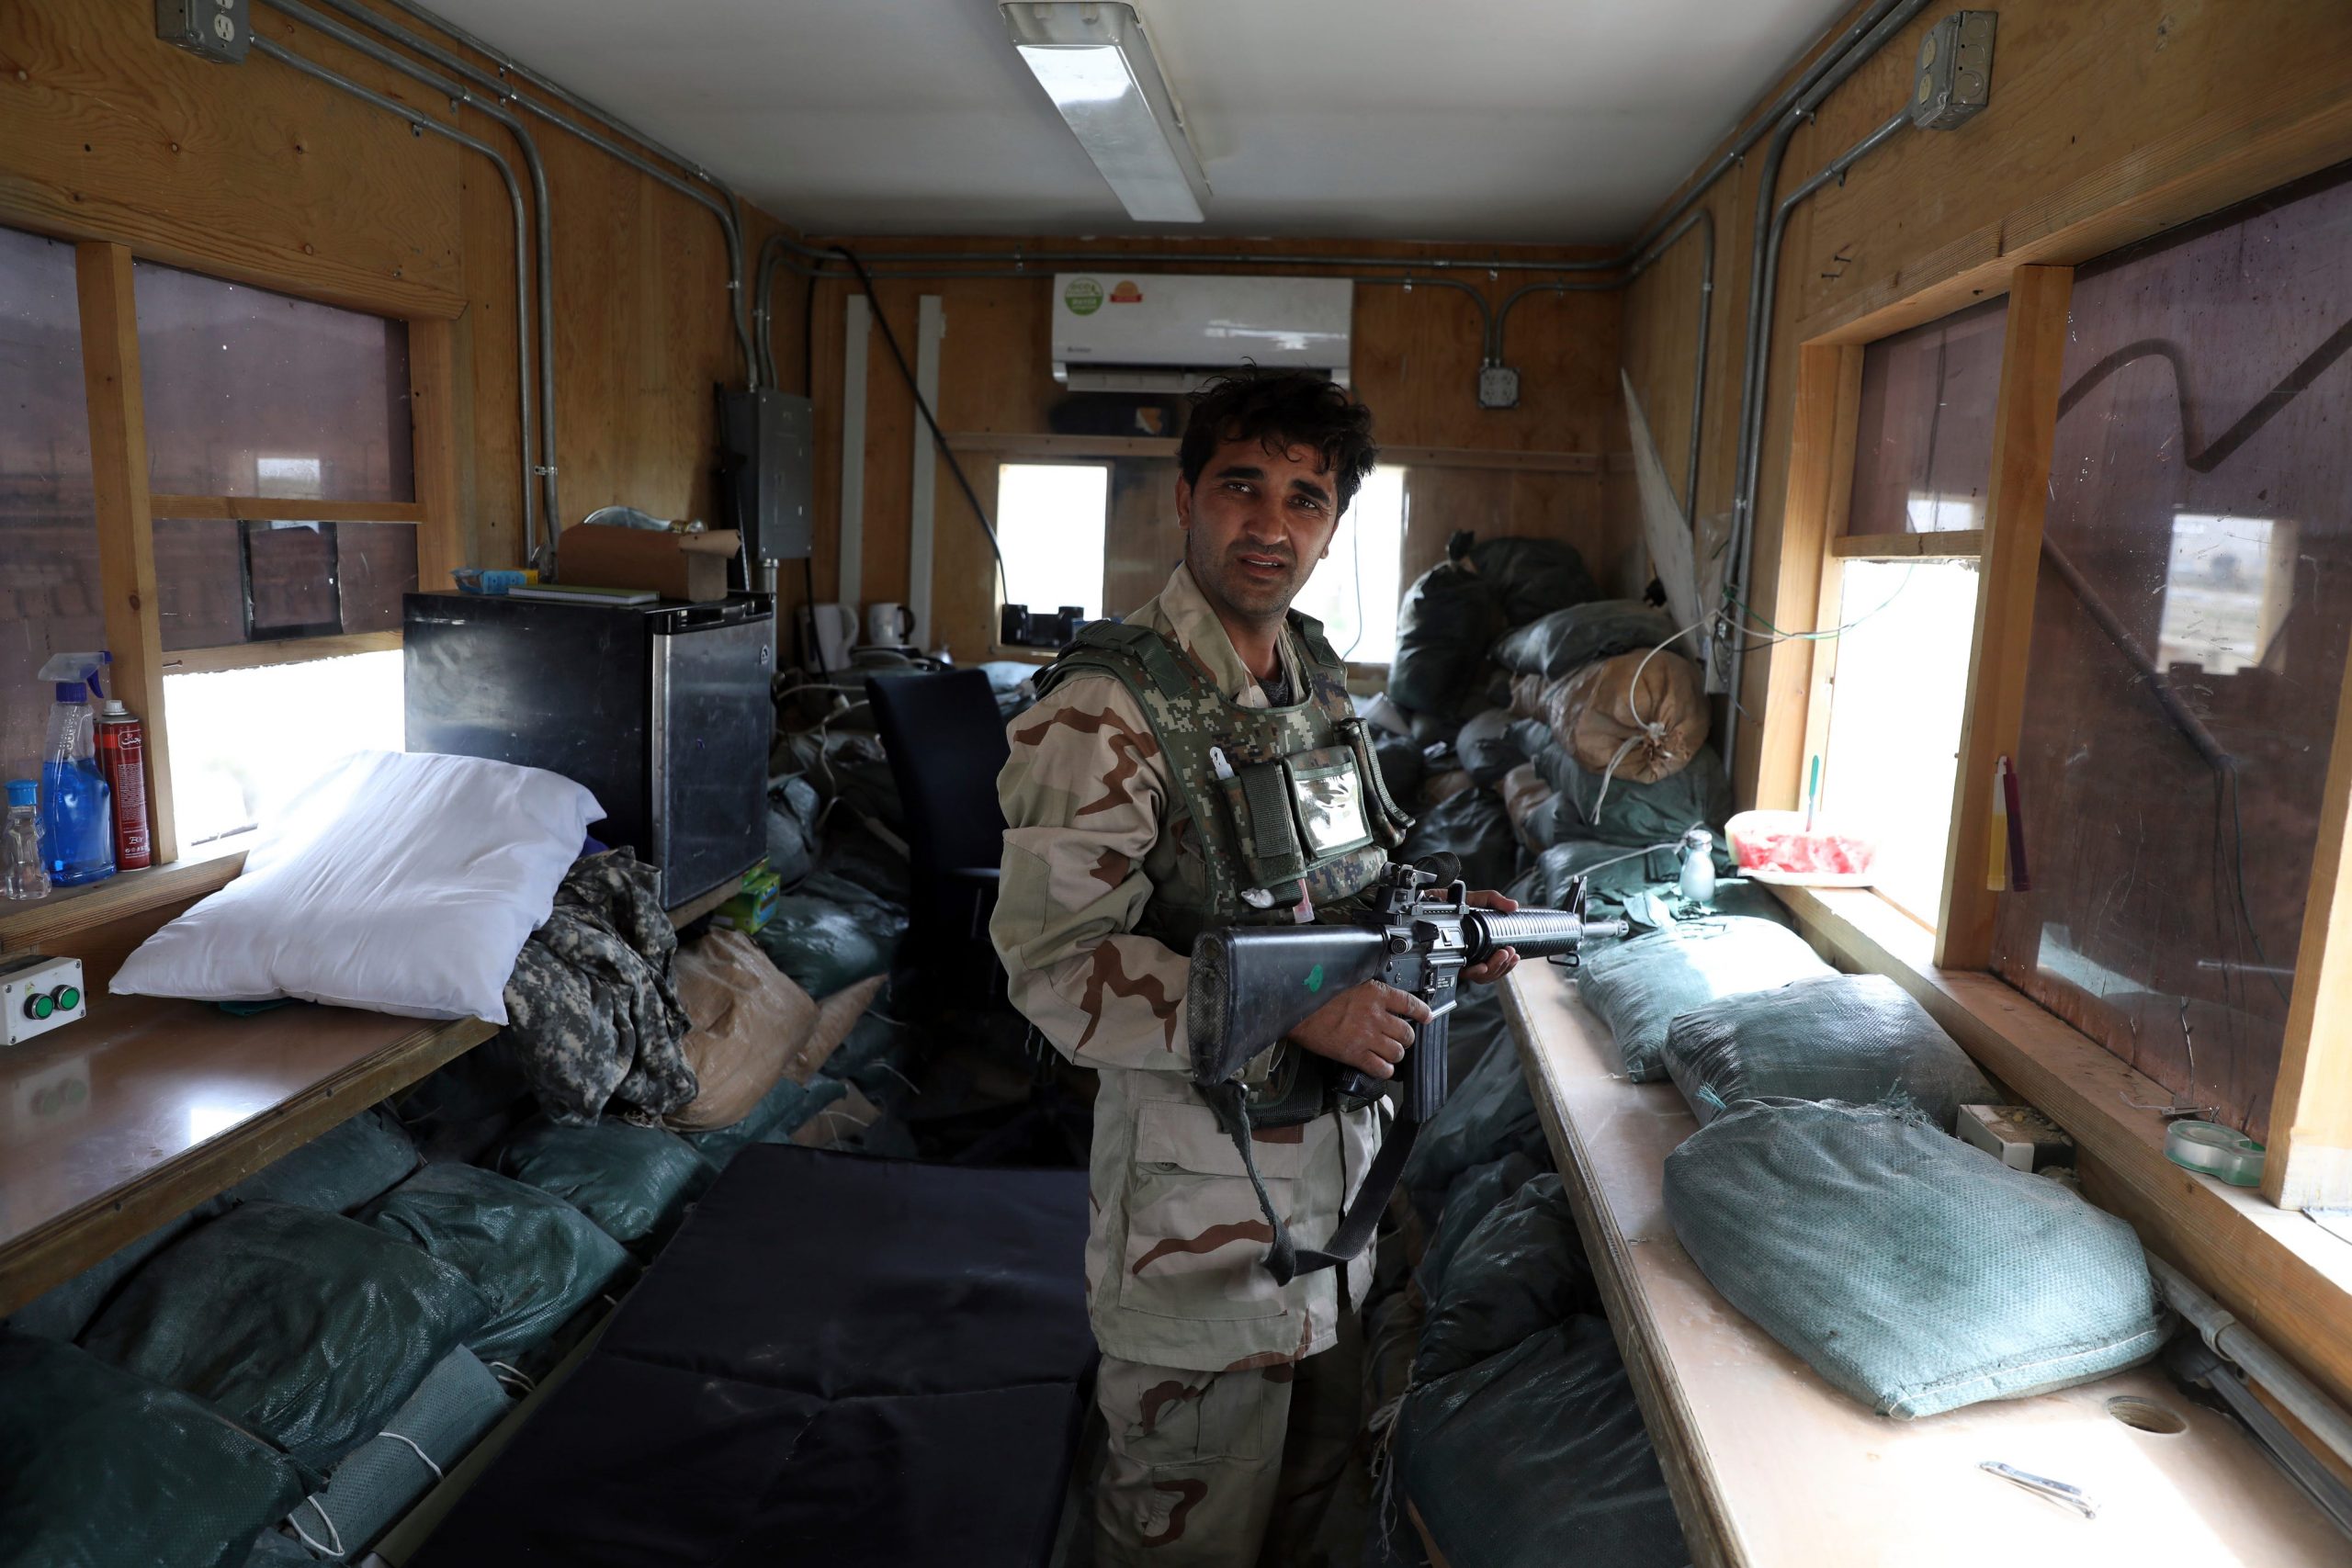 An Afghan security force member standing amid things left behind by the US forces that departed Bagram